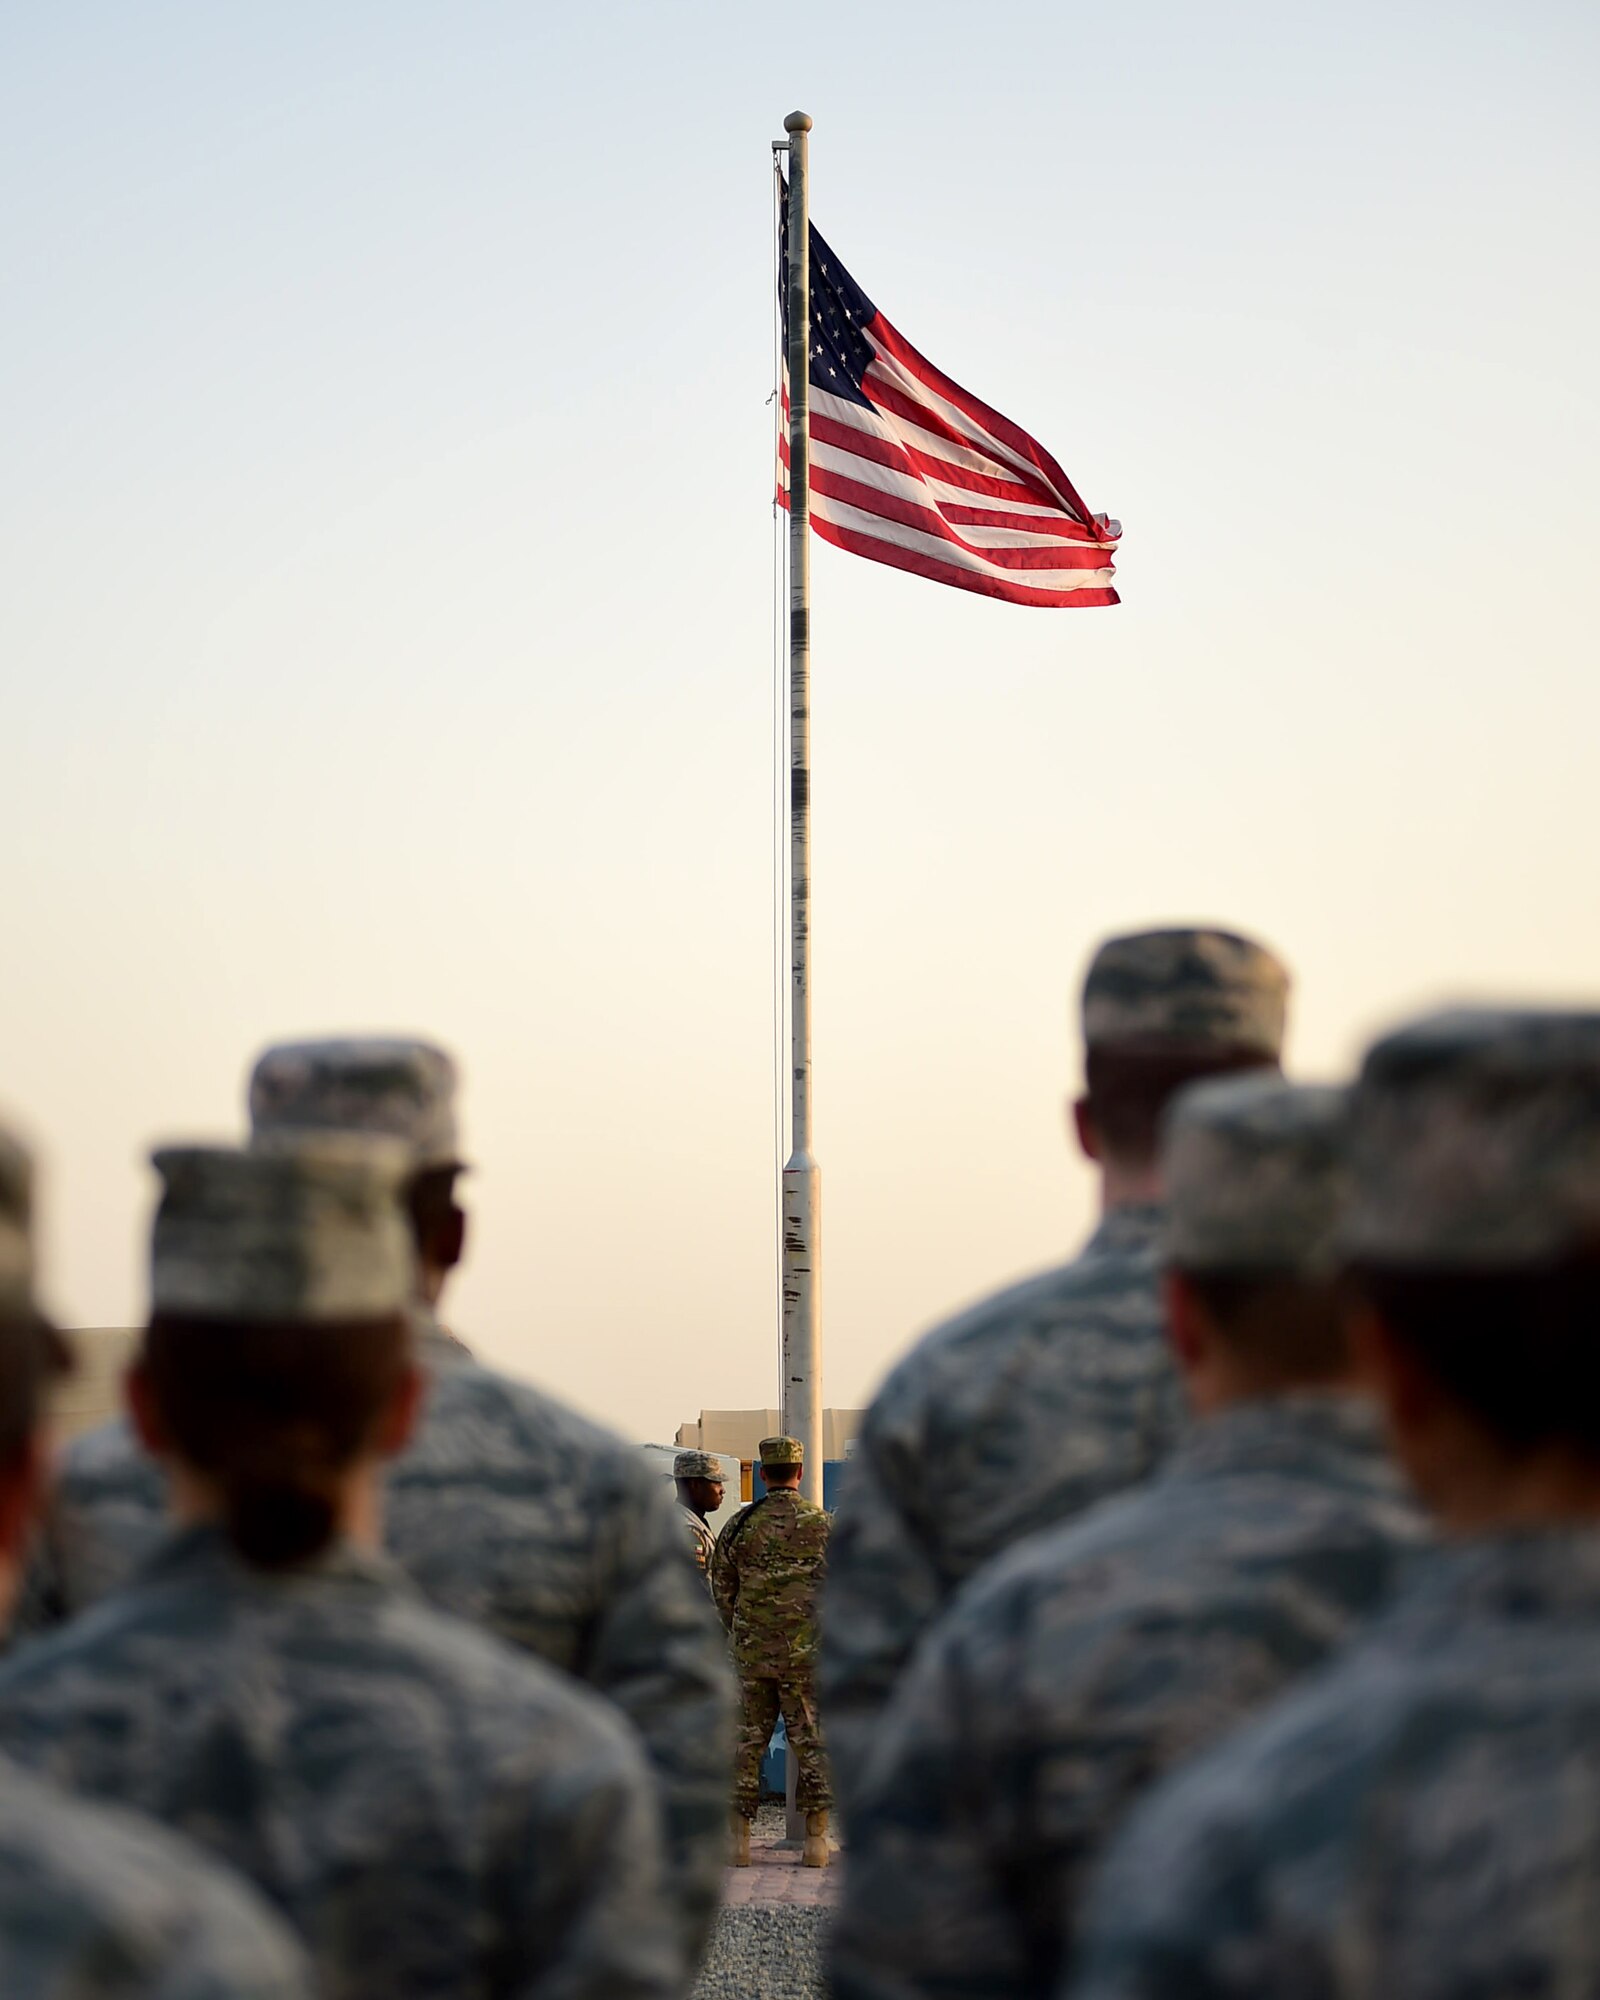 Airmen from the 386th Air Expeditionary Wing standby for the playing of the national anthem during a Veteran’s Day retreat at an undisclosed location in Southwest Asia, Nov. 11, 2015. Veteran’s Day serves as a day to remember and honor the service and sacrifices made by those in the Armed Forces. (U.S. Air Force photo by Staff Sgt. Jerilyn Quintanilla) 